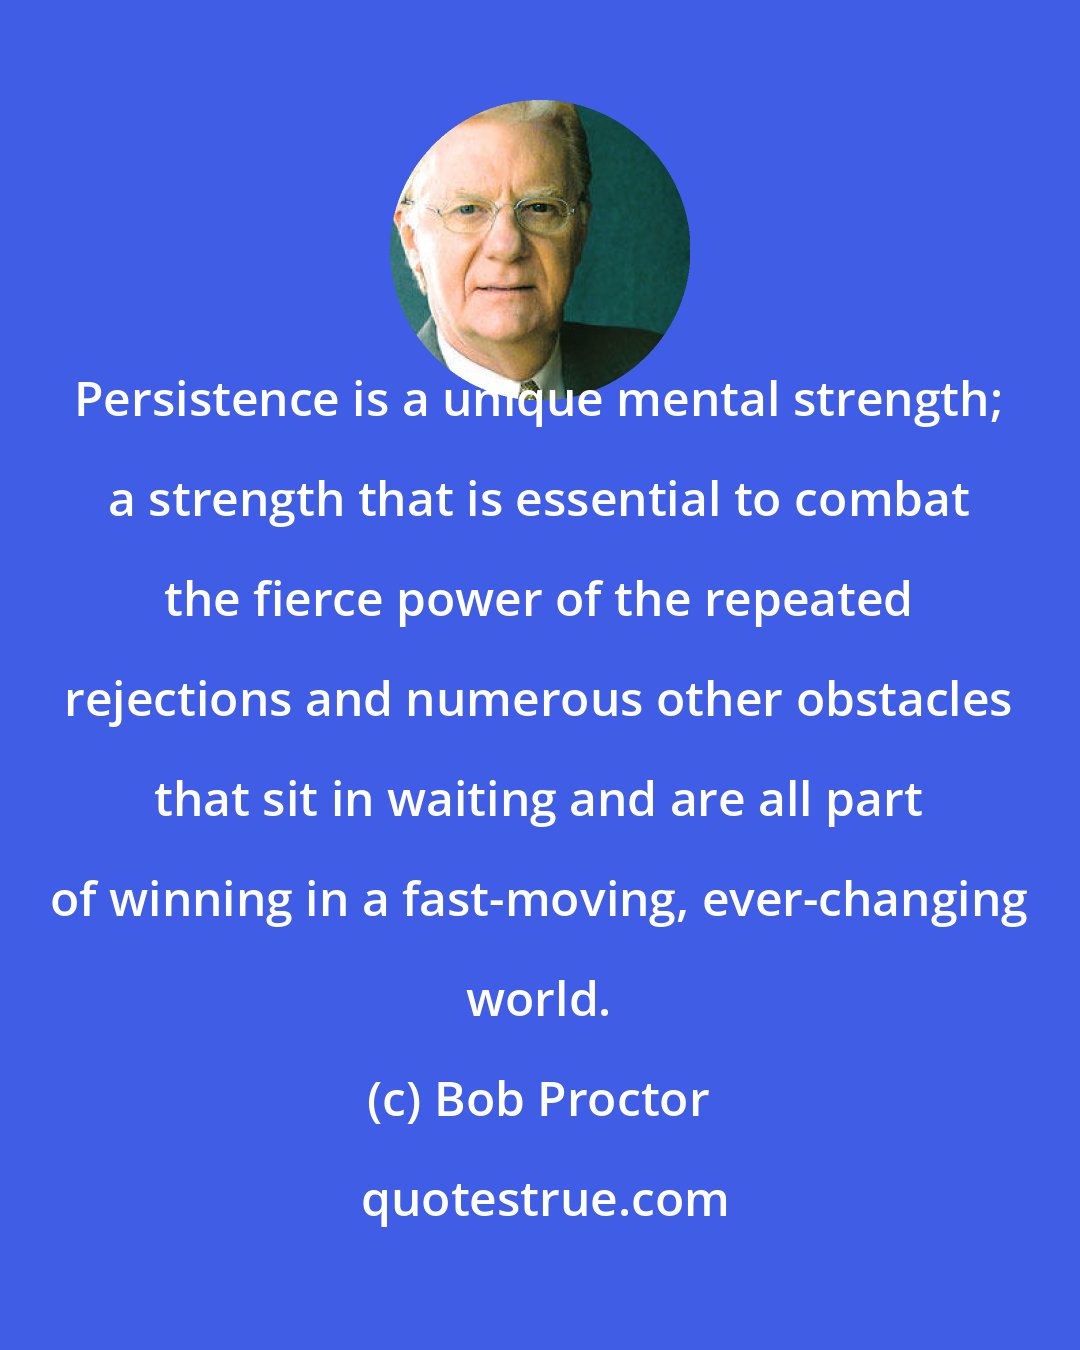 Bob Proctor: Persistence is a unique mental strength; a strength that is essential to combat the fierce power of the repeated rejections and numerous other obstacles that sit in waiting and are all part of winning in a fast-moving, ever-changing world.